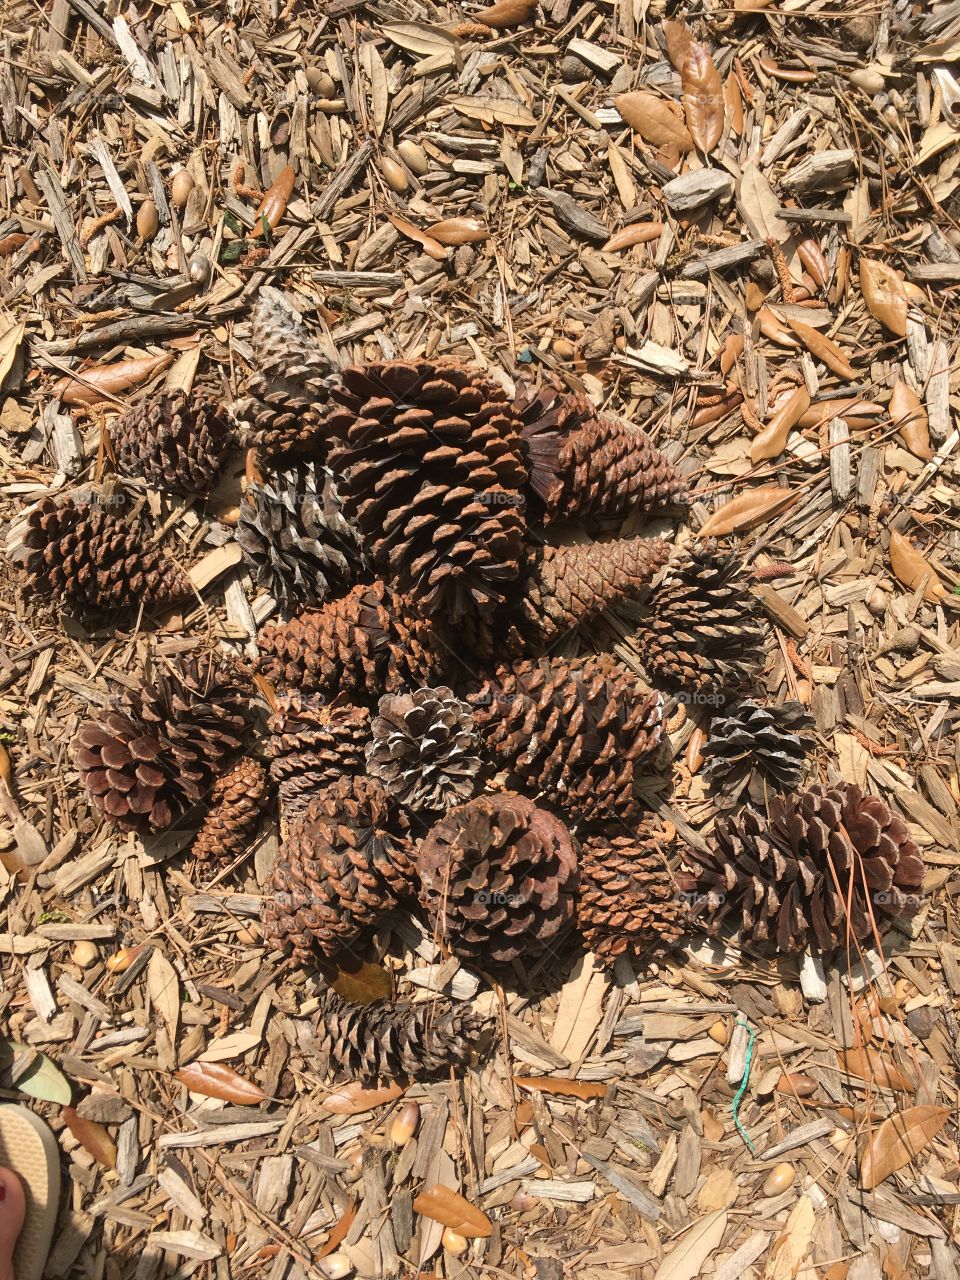 Pile of pine ones